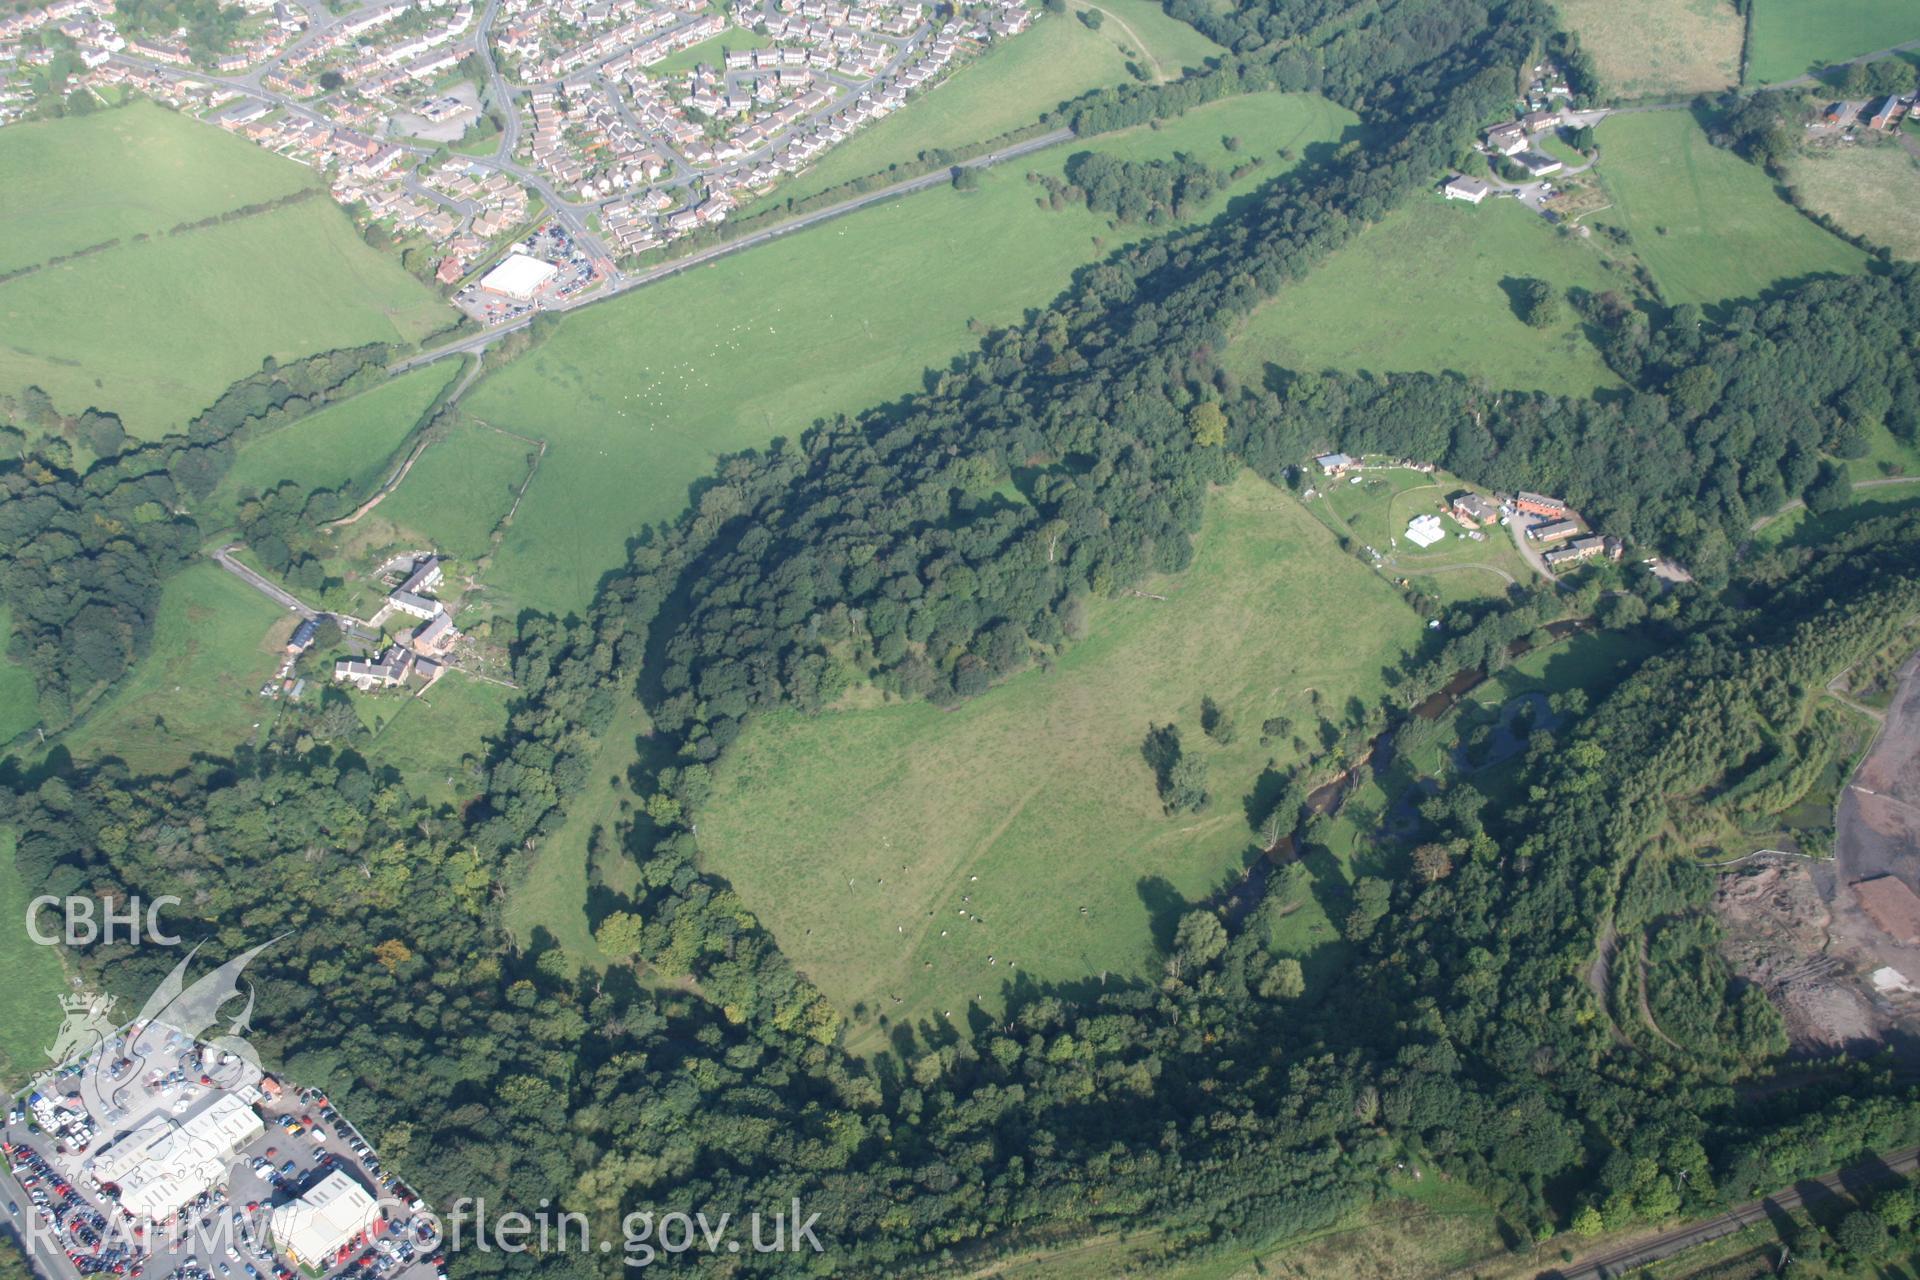 Digital colour photograph showing Bryn Alyn Hillfort and the surrounding area.